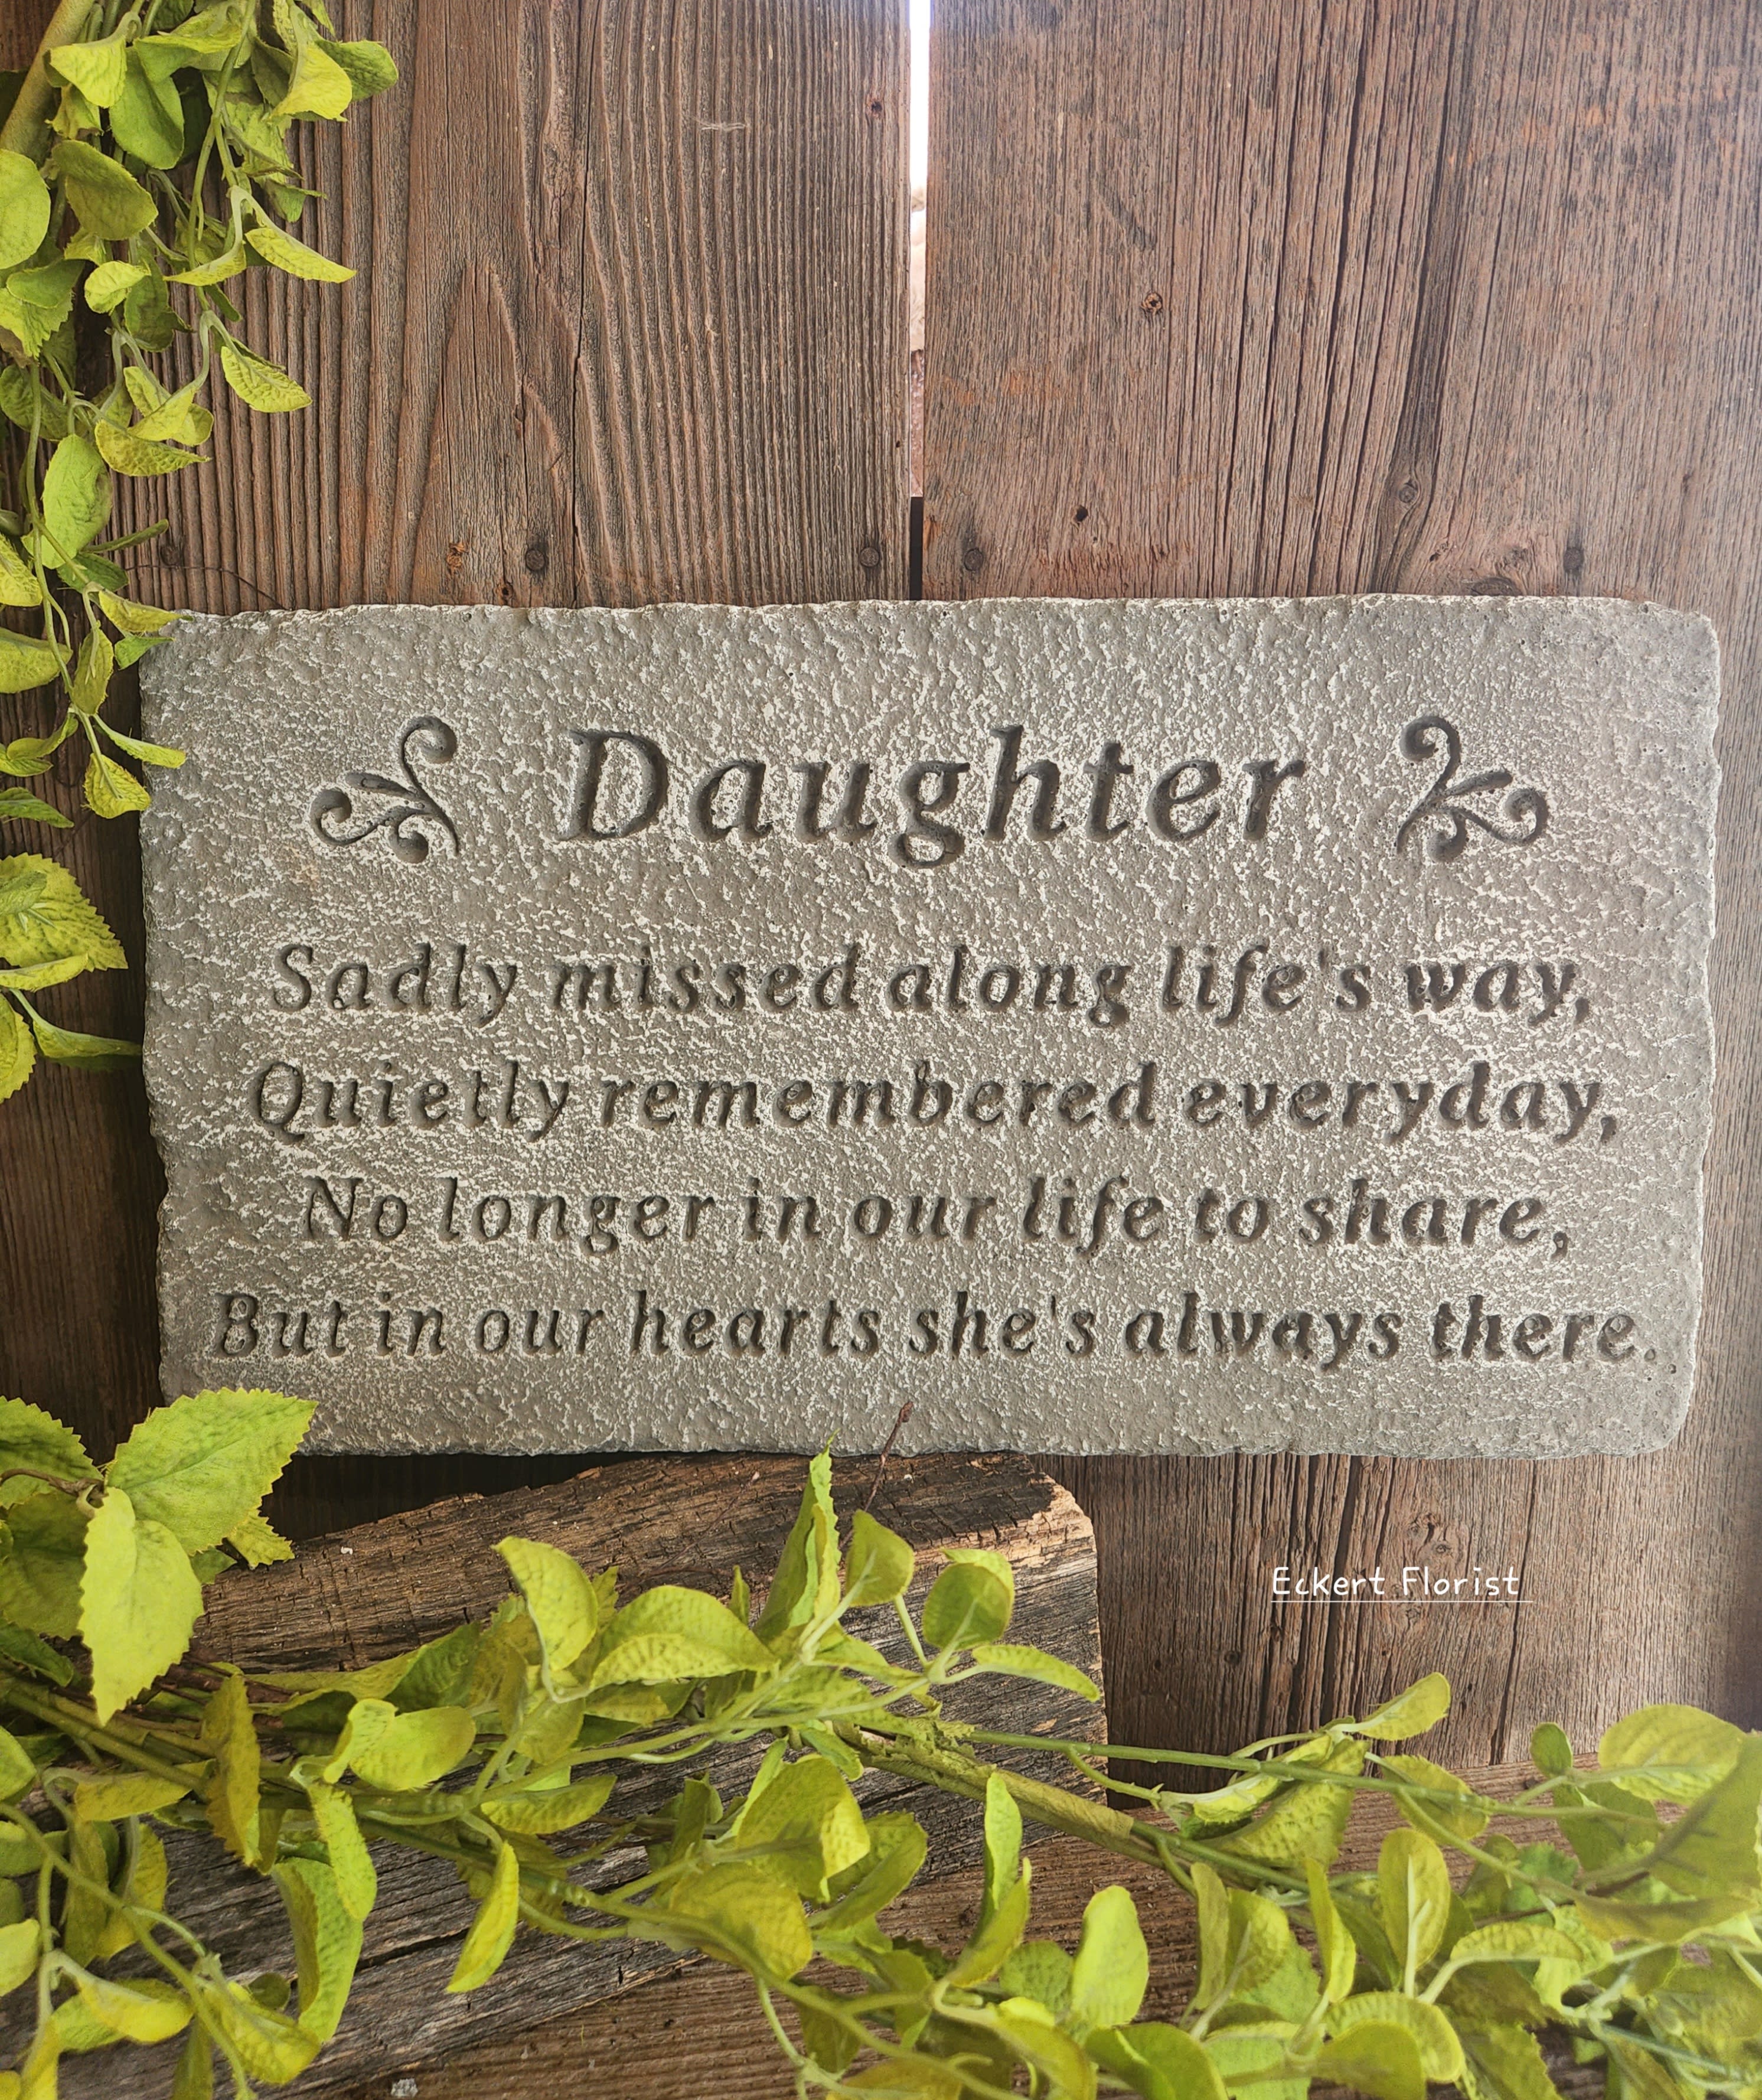 Eckert Florist's &quot;Daughter...&quot; Memorial Stone - *Our Local Delivery Only &quot;Daughter - Sadly missed along life's way, Quietly remembered everyday, No longer in our life to share, But in our hearts she's always there.&quot; Cement Stone measures approx. 10&quot; H X 17.5&quot; W *Stand Included *Upgrade with artificial flowers. See Deluxe option. ALL OF OUR STONES COME DECORATED WITH A SHEER BOW, WILLOW, RAFFIA, AND OUR SIGNATURE BIRD.